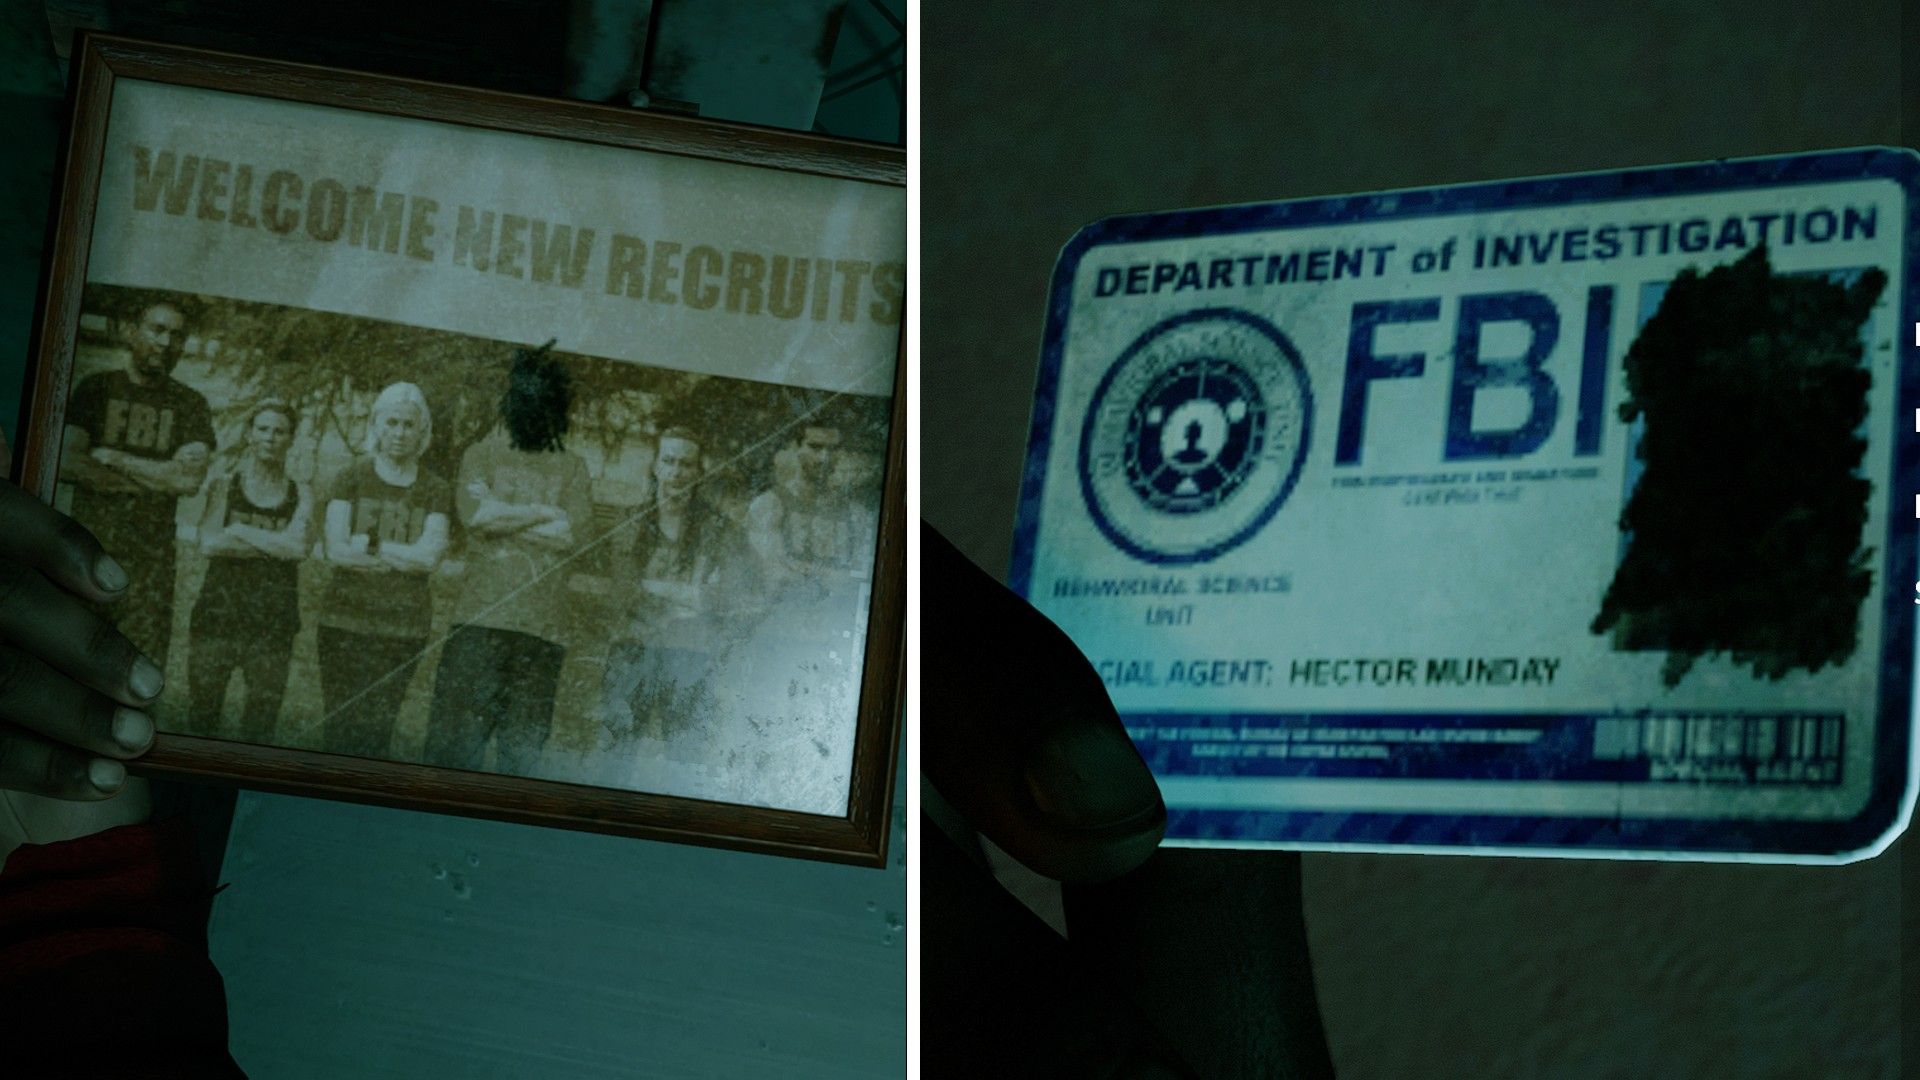 Hector Munday's FBI ID and new recruit photograph, revealing Du'Meyt's real identity in The Devil In Me